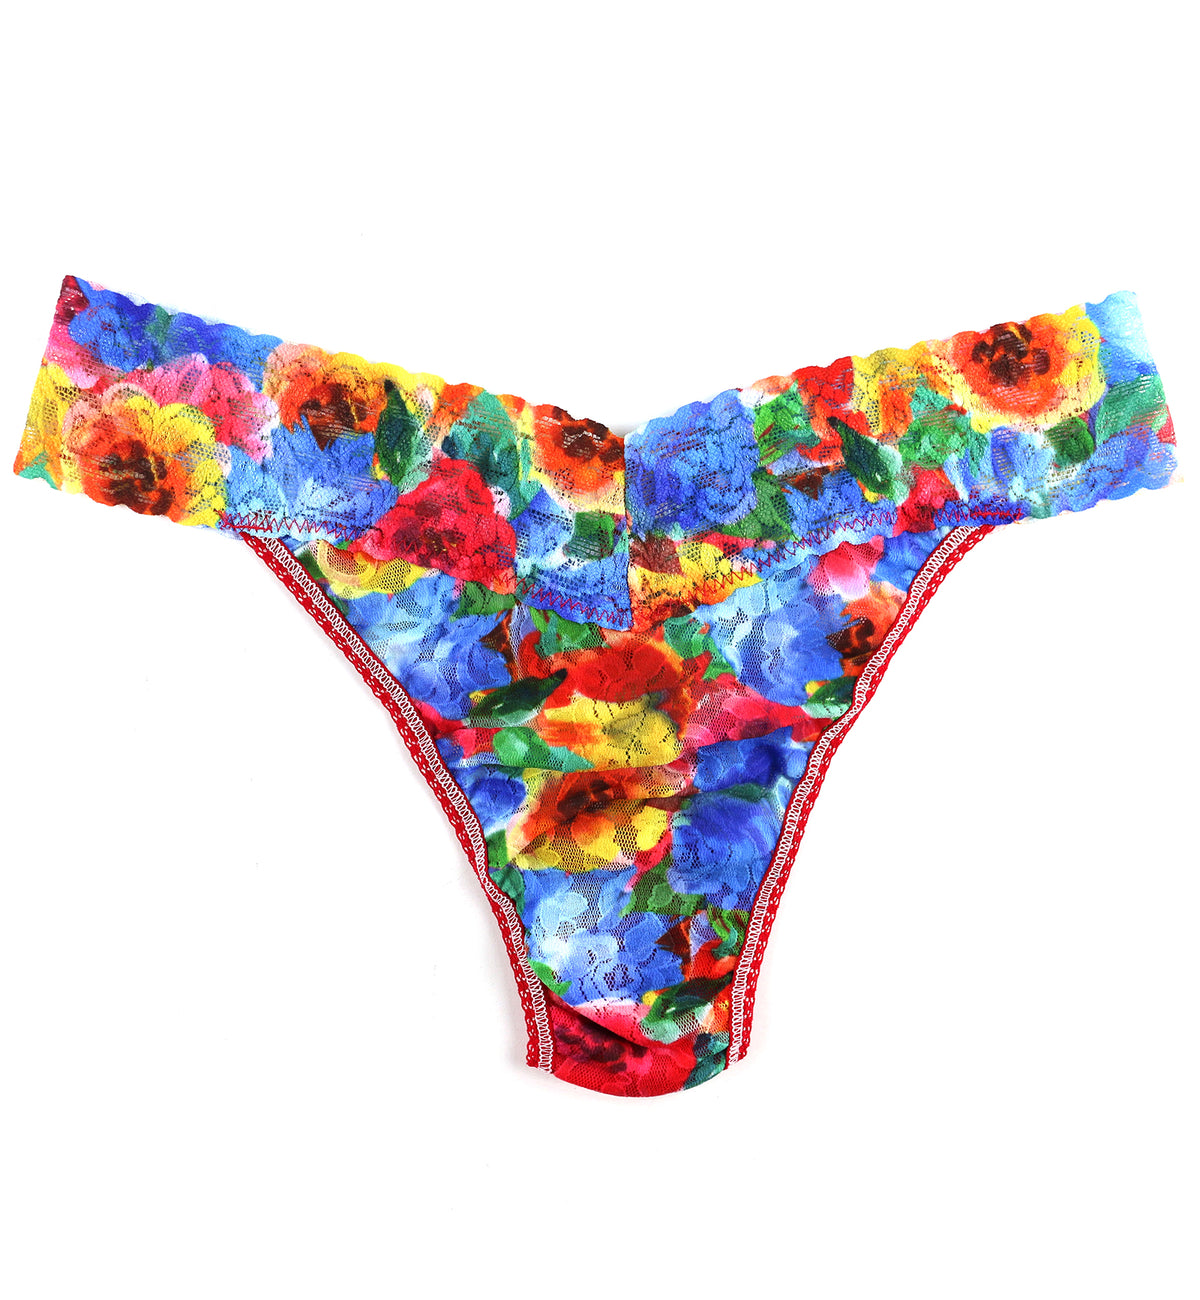 Hanky Panky Signature Lace Printed Original Rise Thong (PR4811P),Bold Blooms - Bold Blooms,One Size